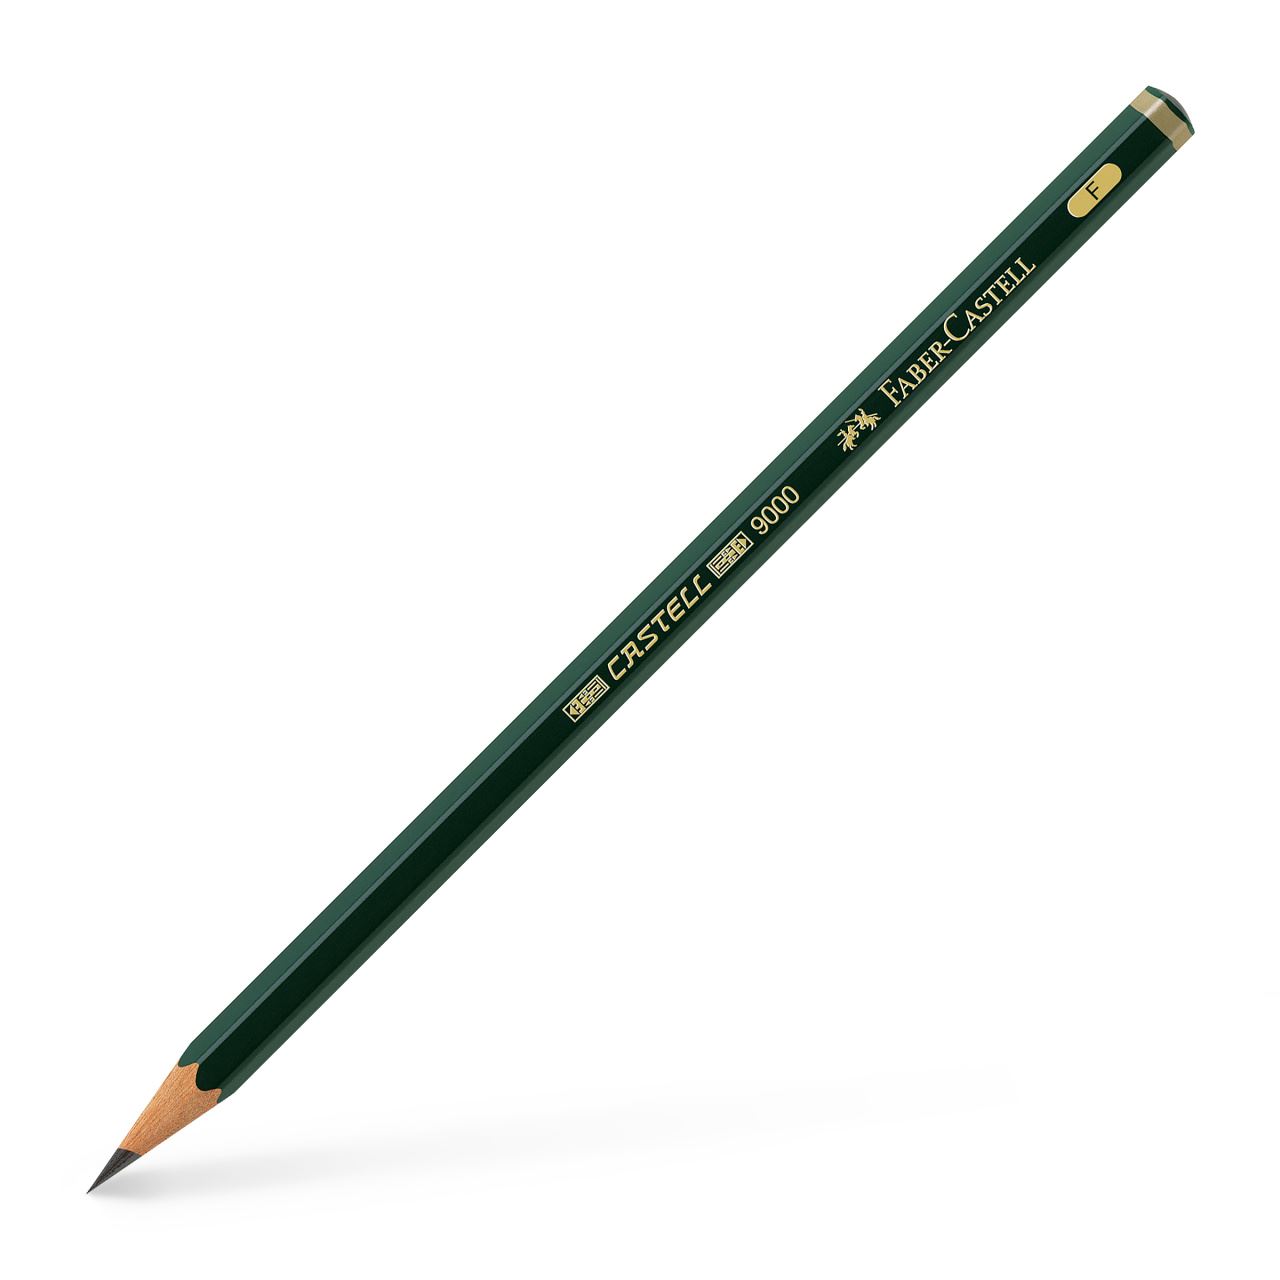 Faber-Castell - Castell 9000 graphite pencil, F